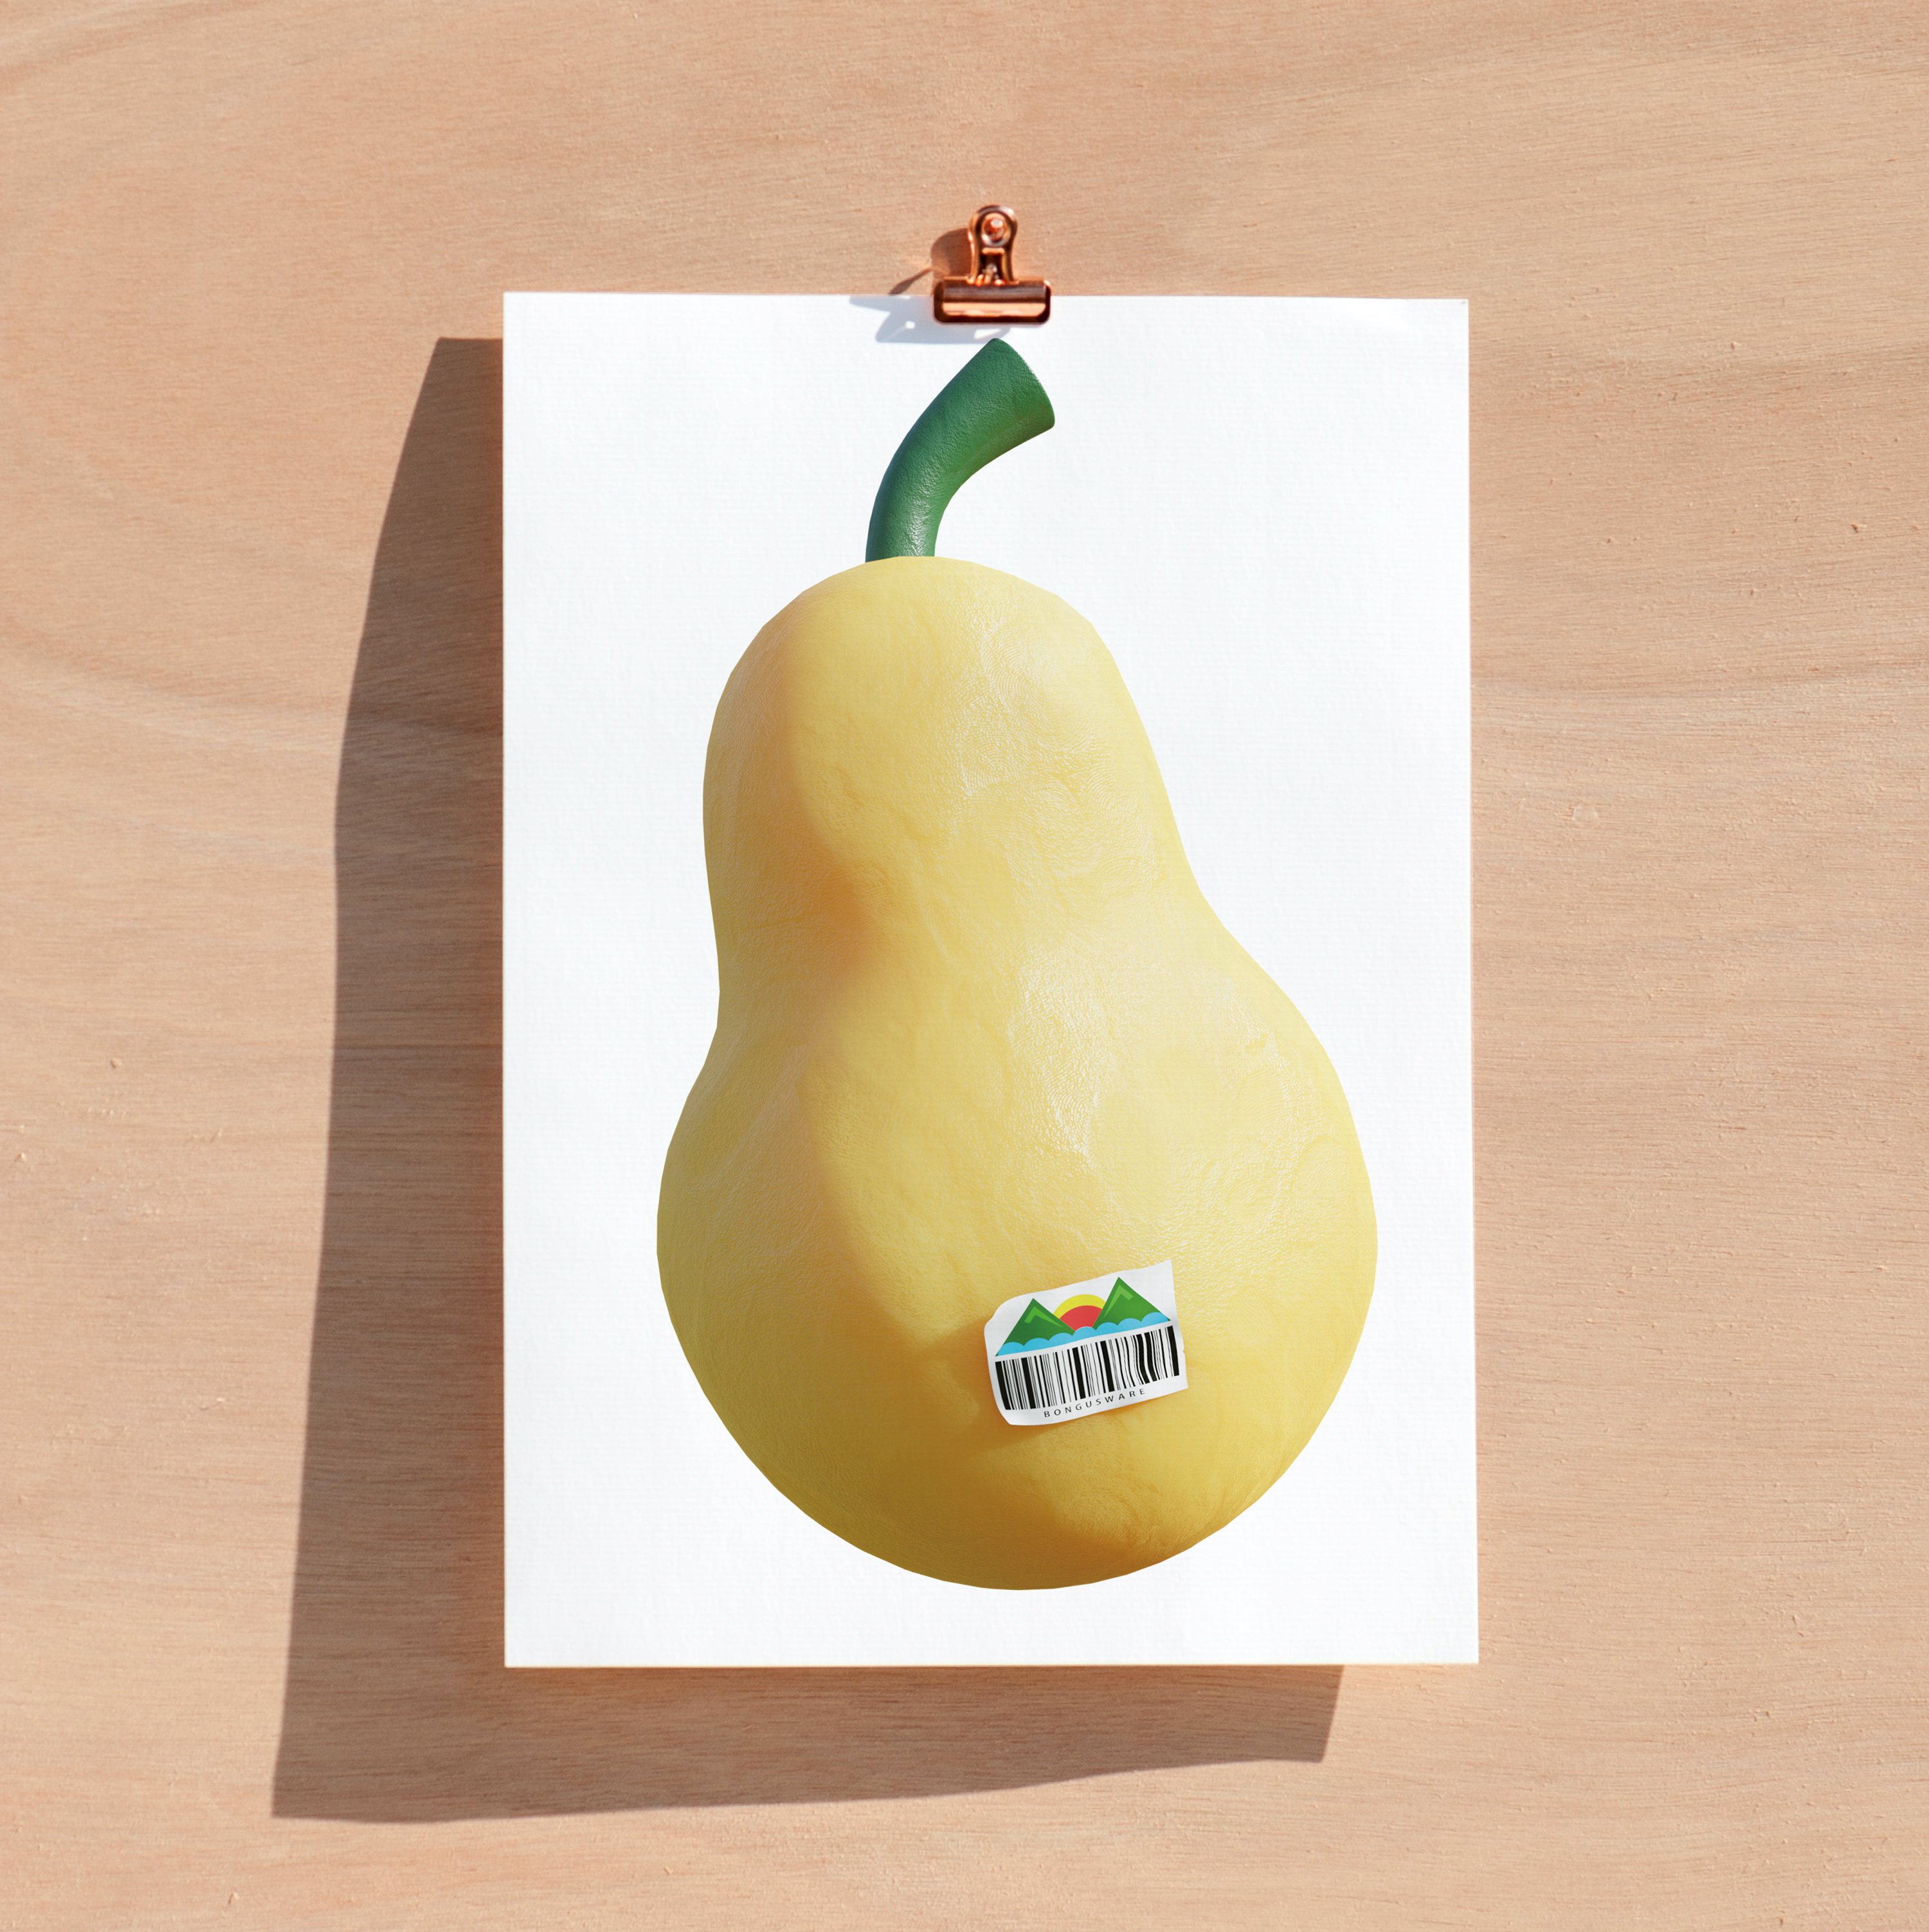 Buy some fruit! #Pear